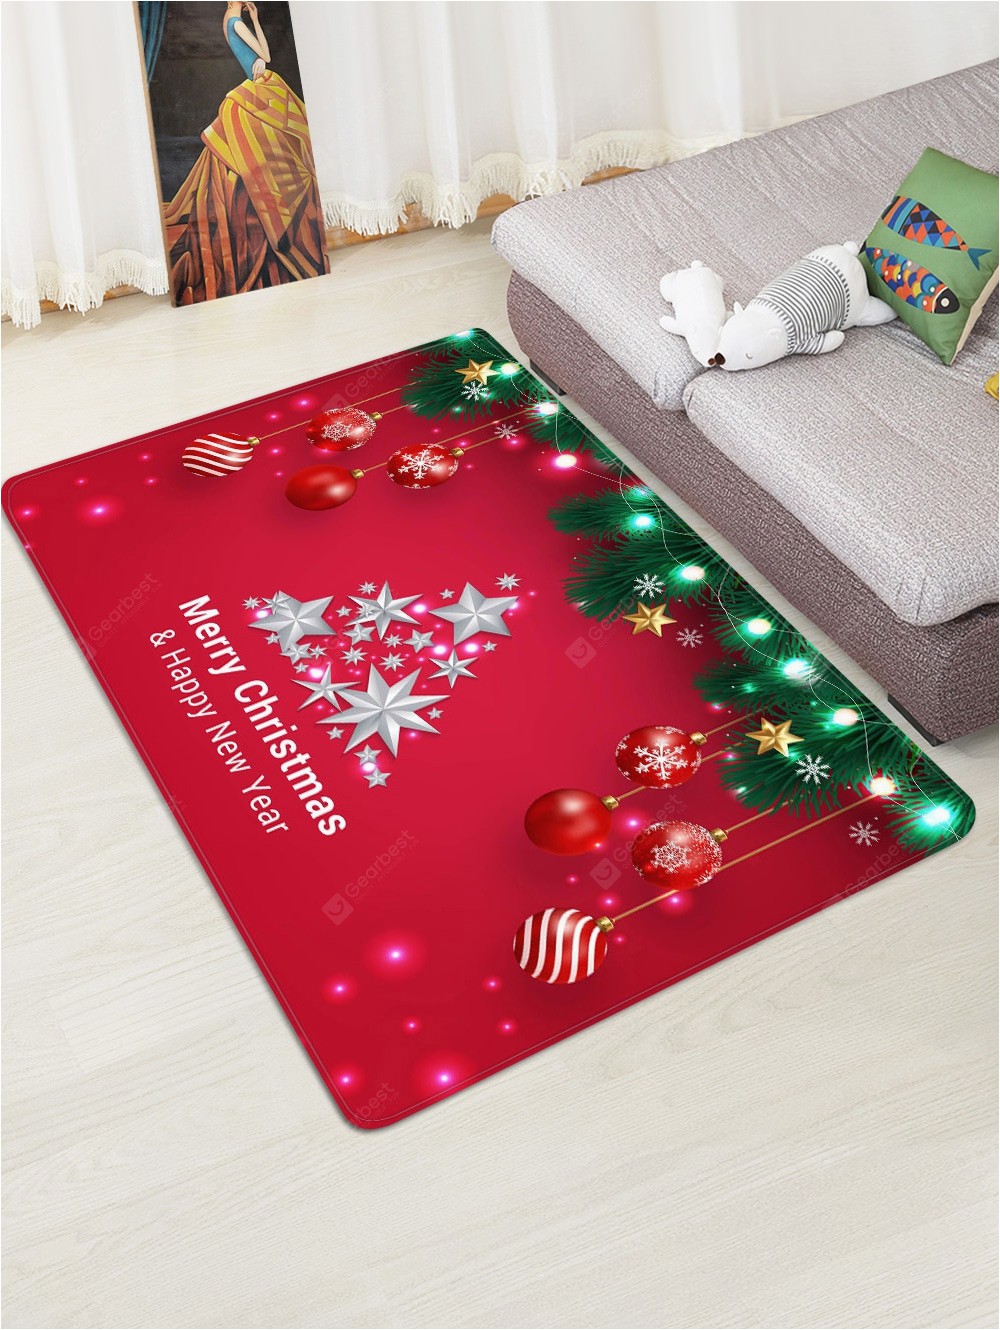 Christmas area Rugs for Sale Christmas Tree Balls Lights Greeting Pattern Water Absorption area Rug